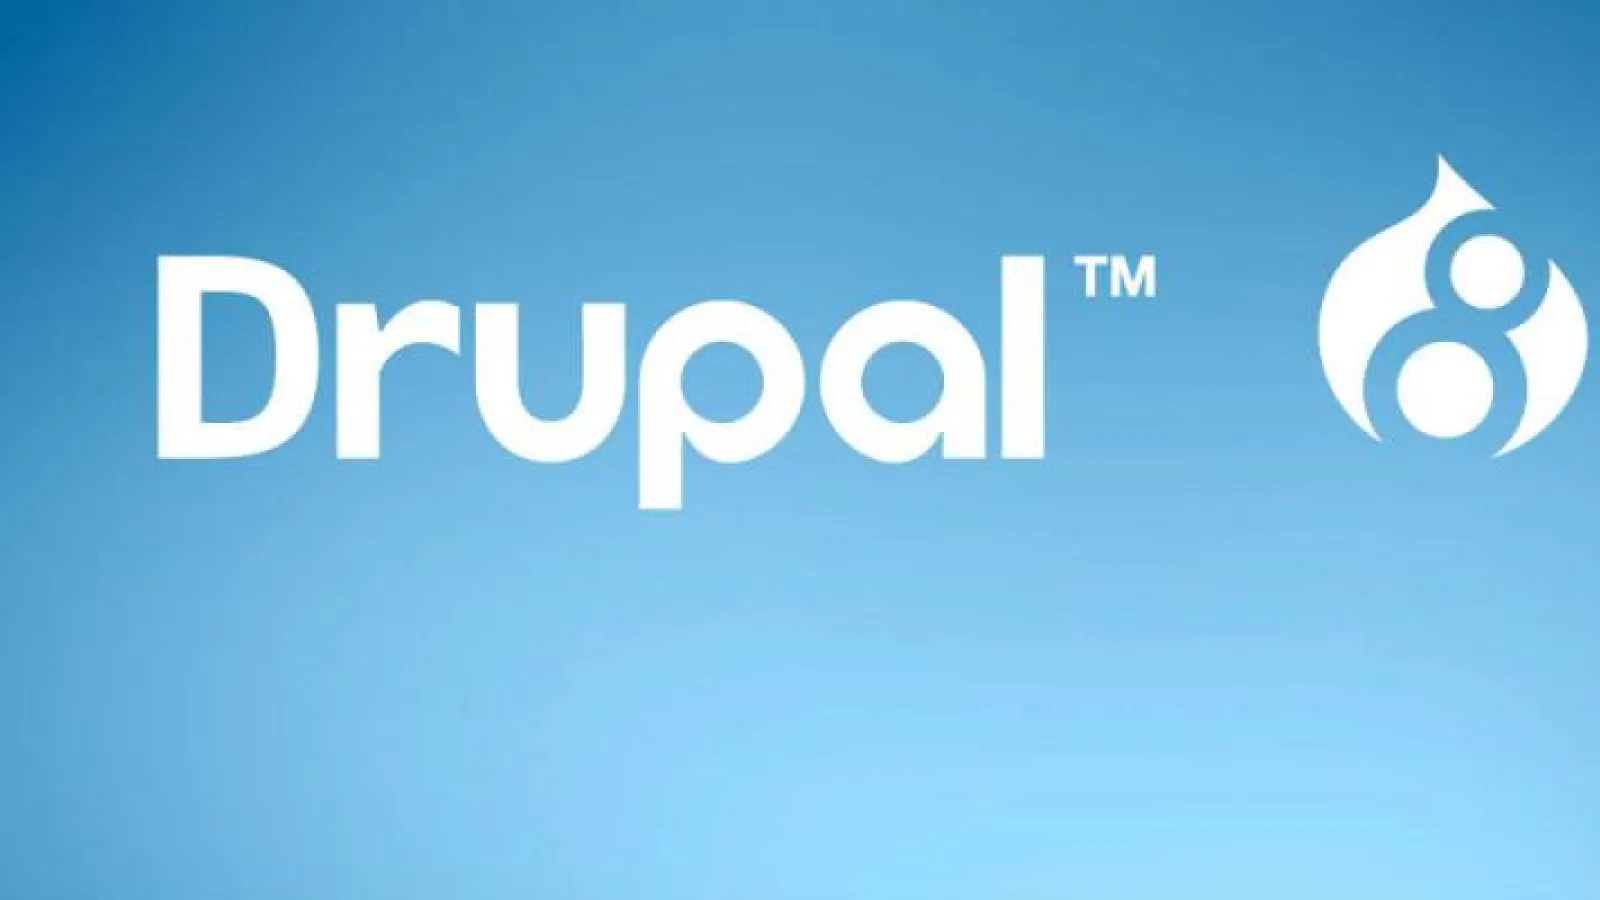 Drupal 8 - A Milestone in Flexibility, Performance and Enhanced Experience!